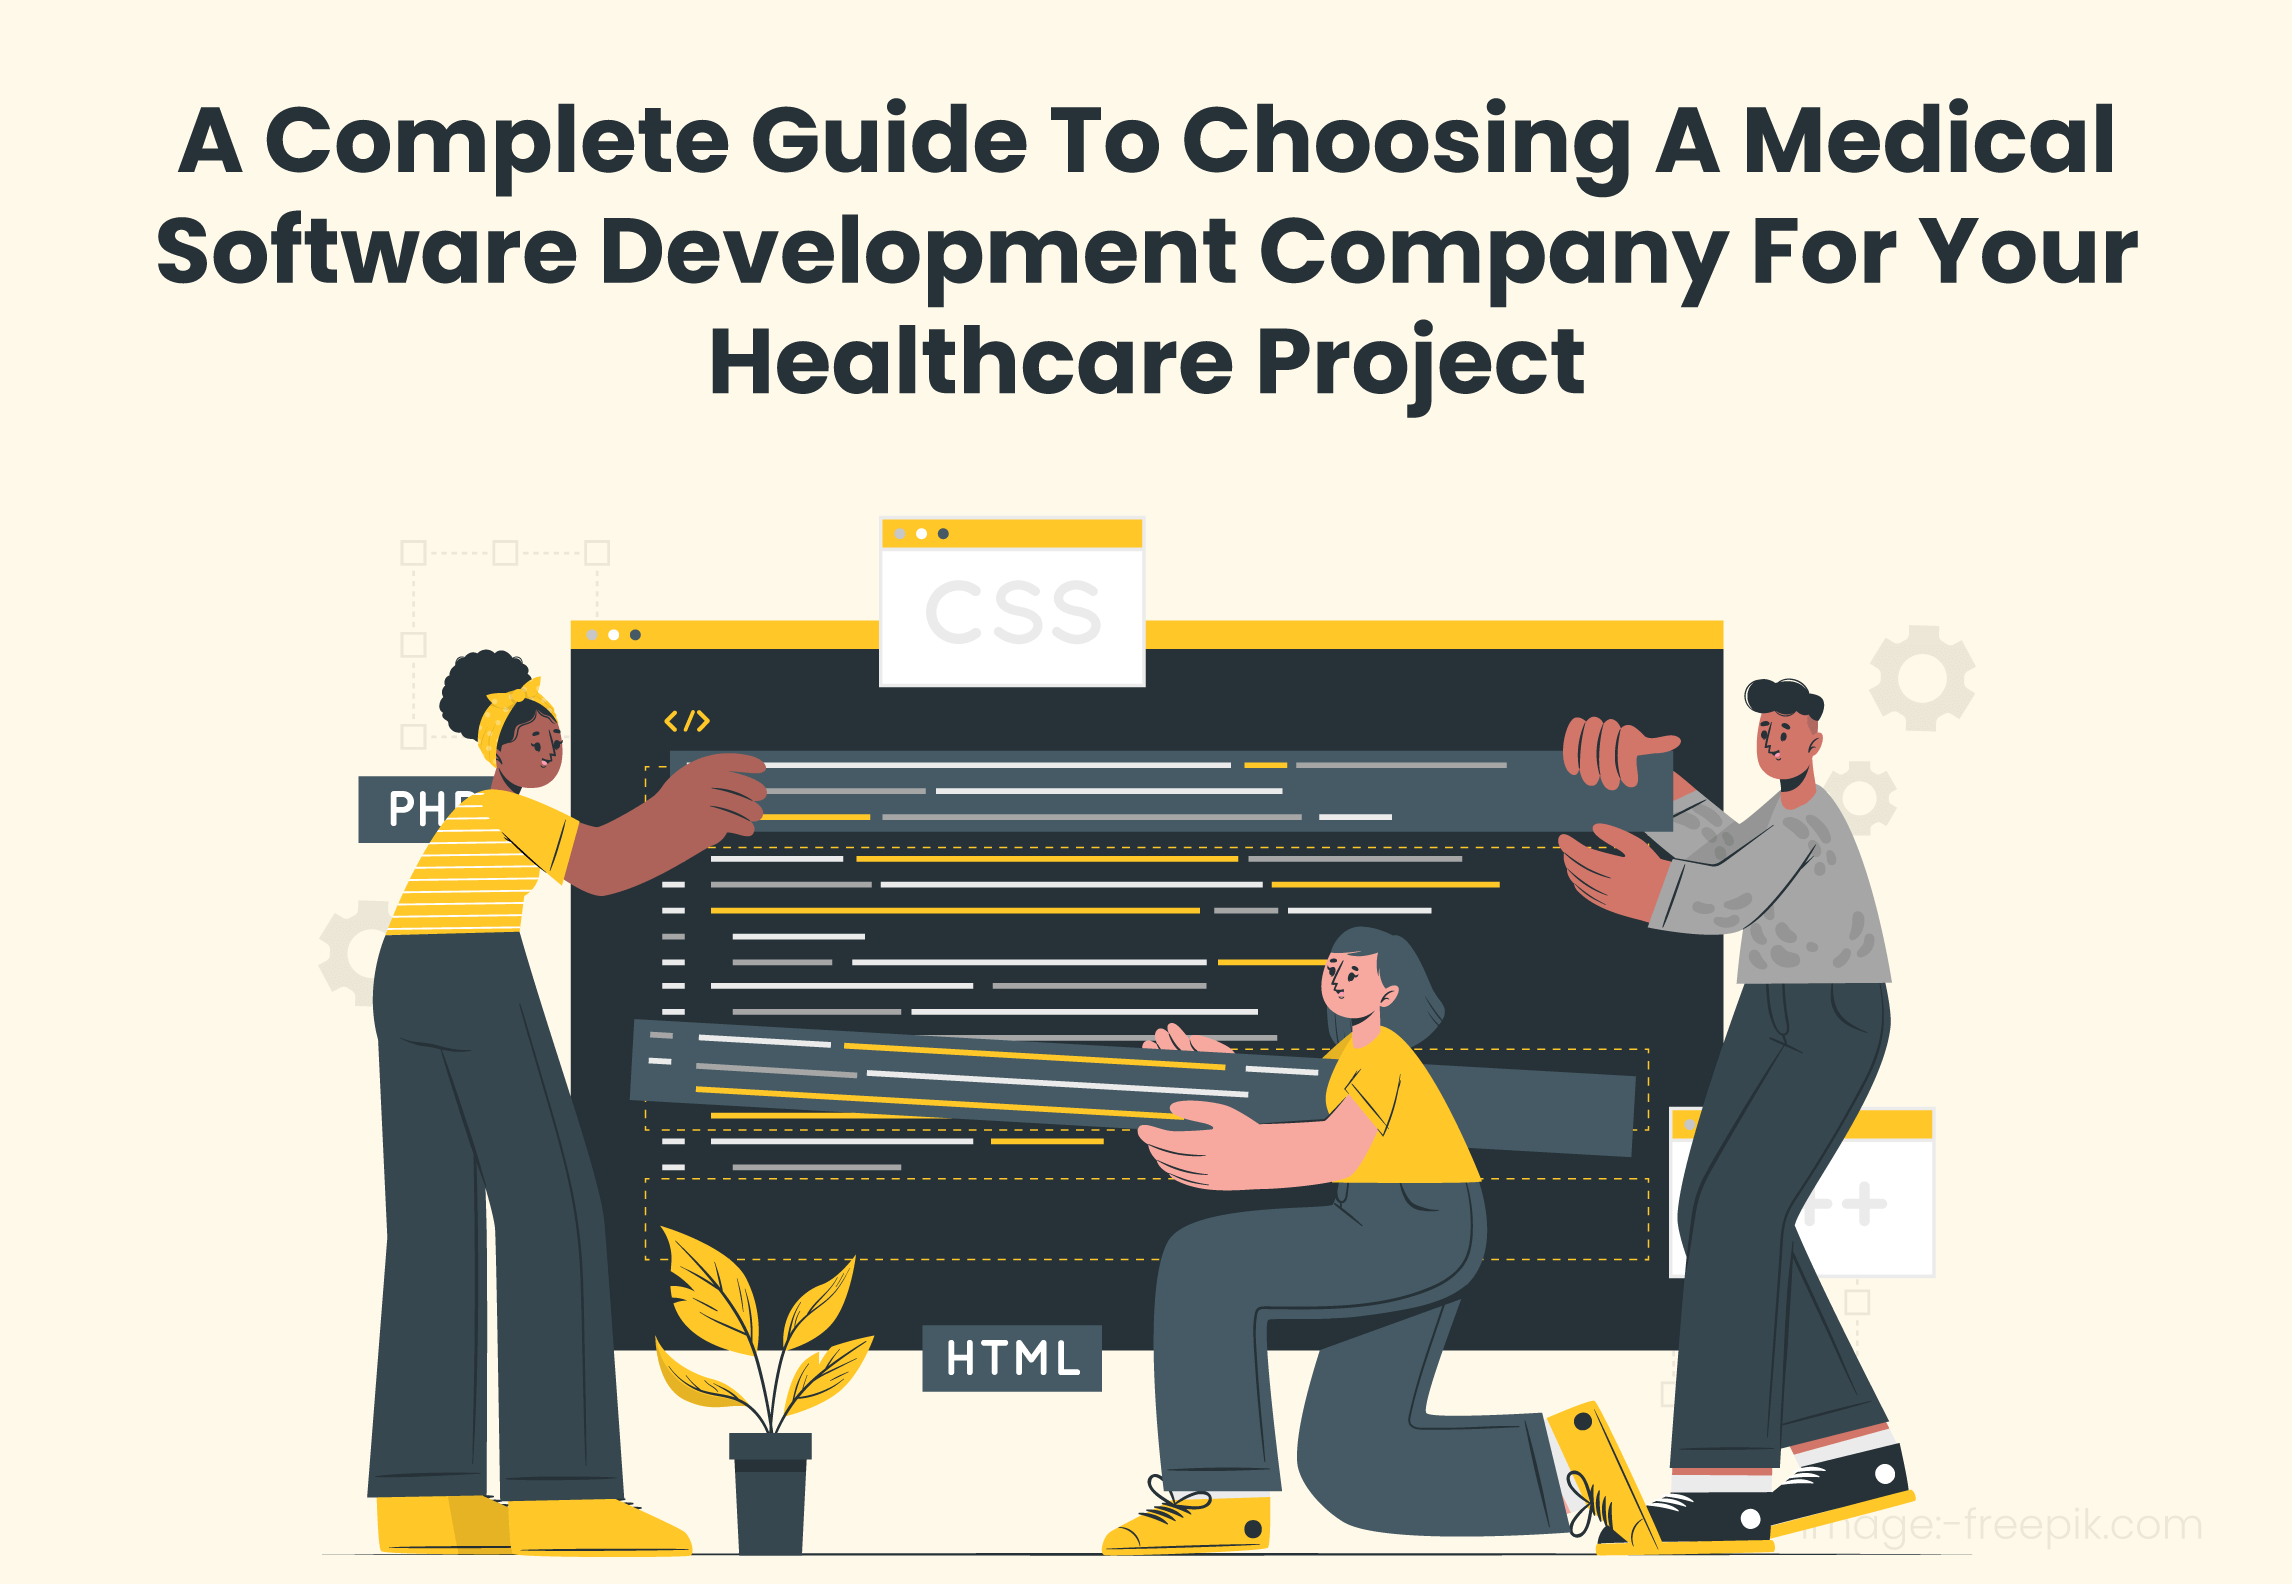 A Complete Guide To Choosing A Medical Software Development Company For Your Healthcare Project